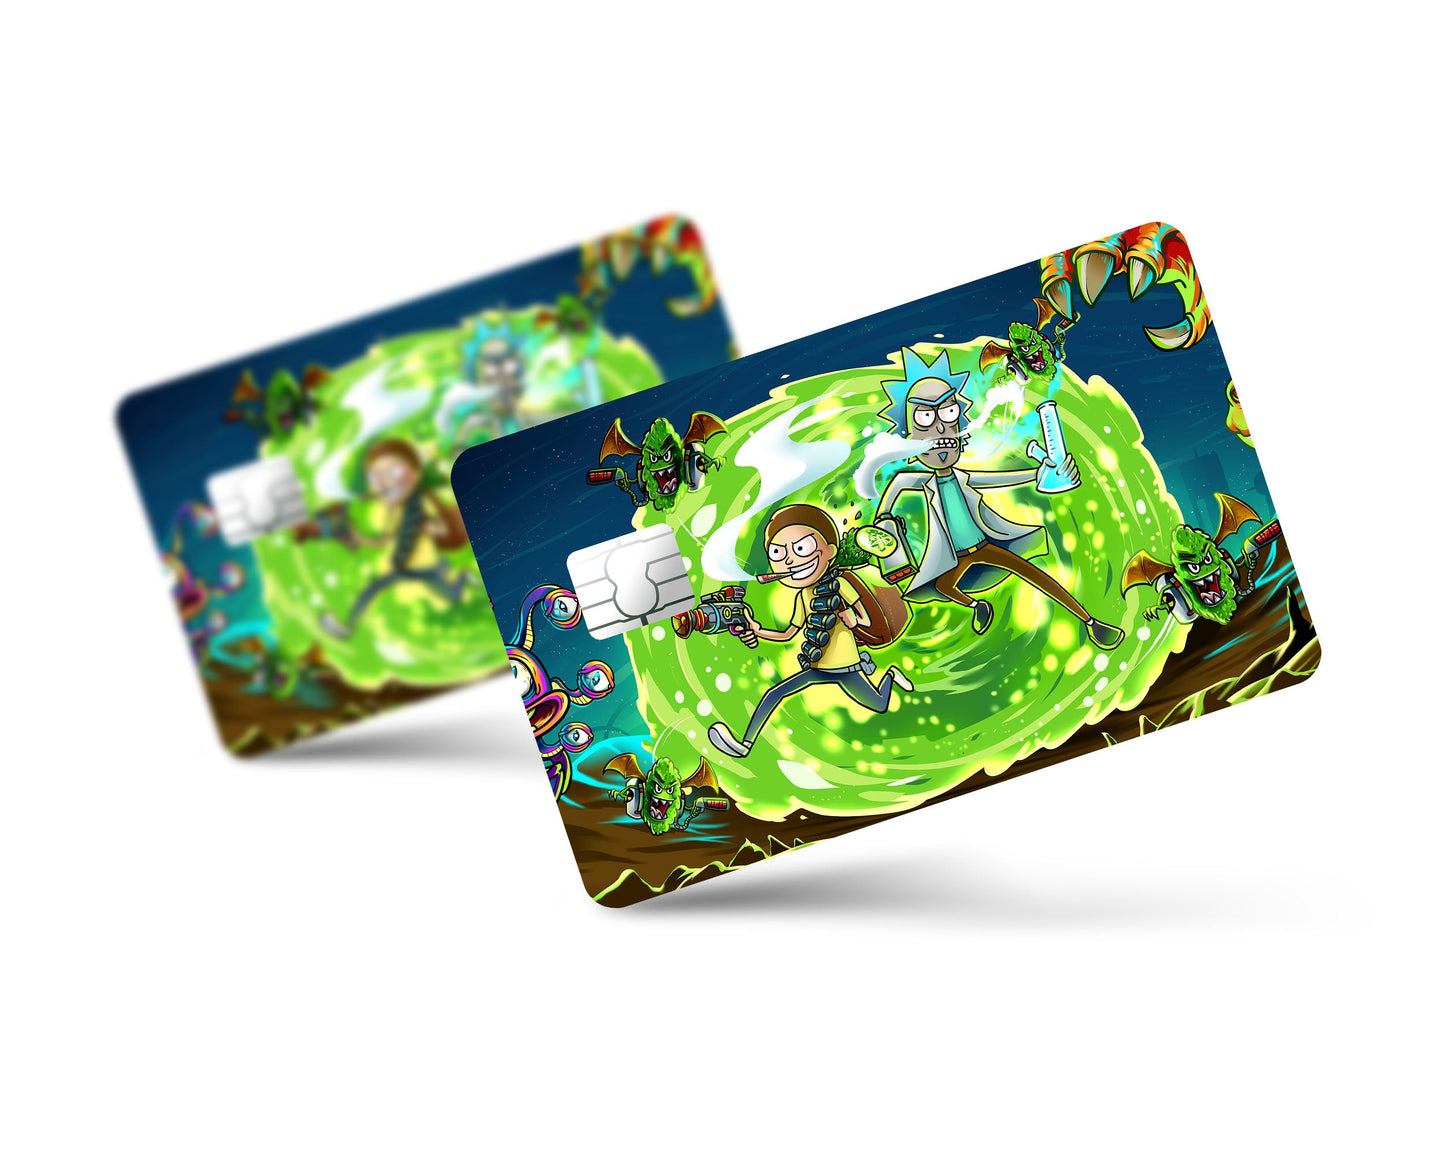 Anime Town Creations Credit Card Rick and Morty Portal Time Full Skins - Anime Rick and Morty Credit Card Skin